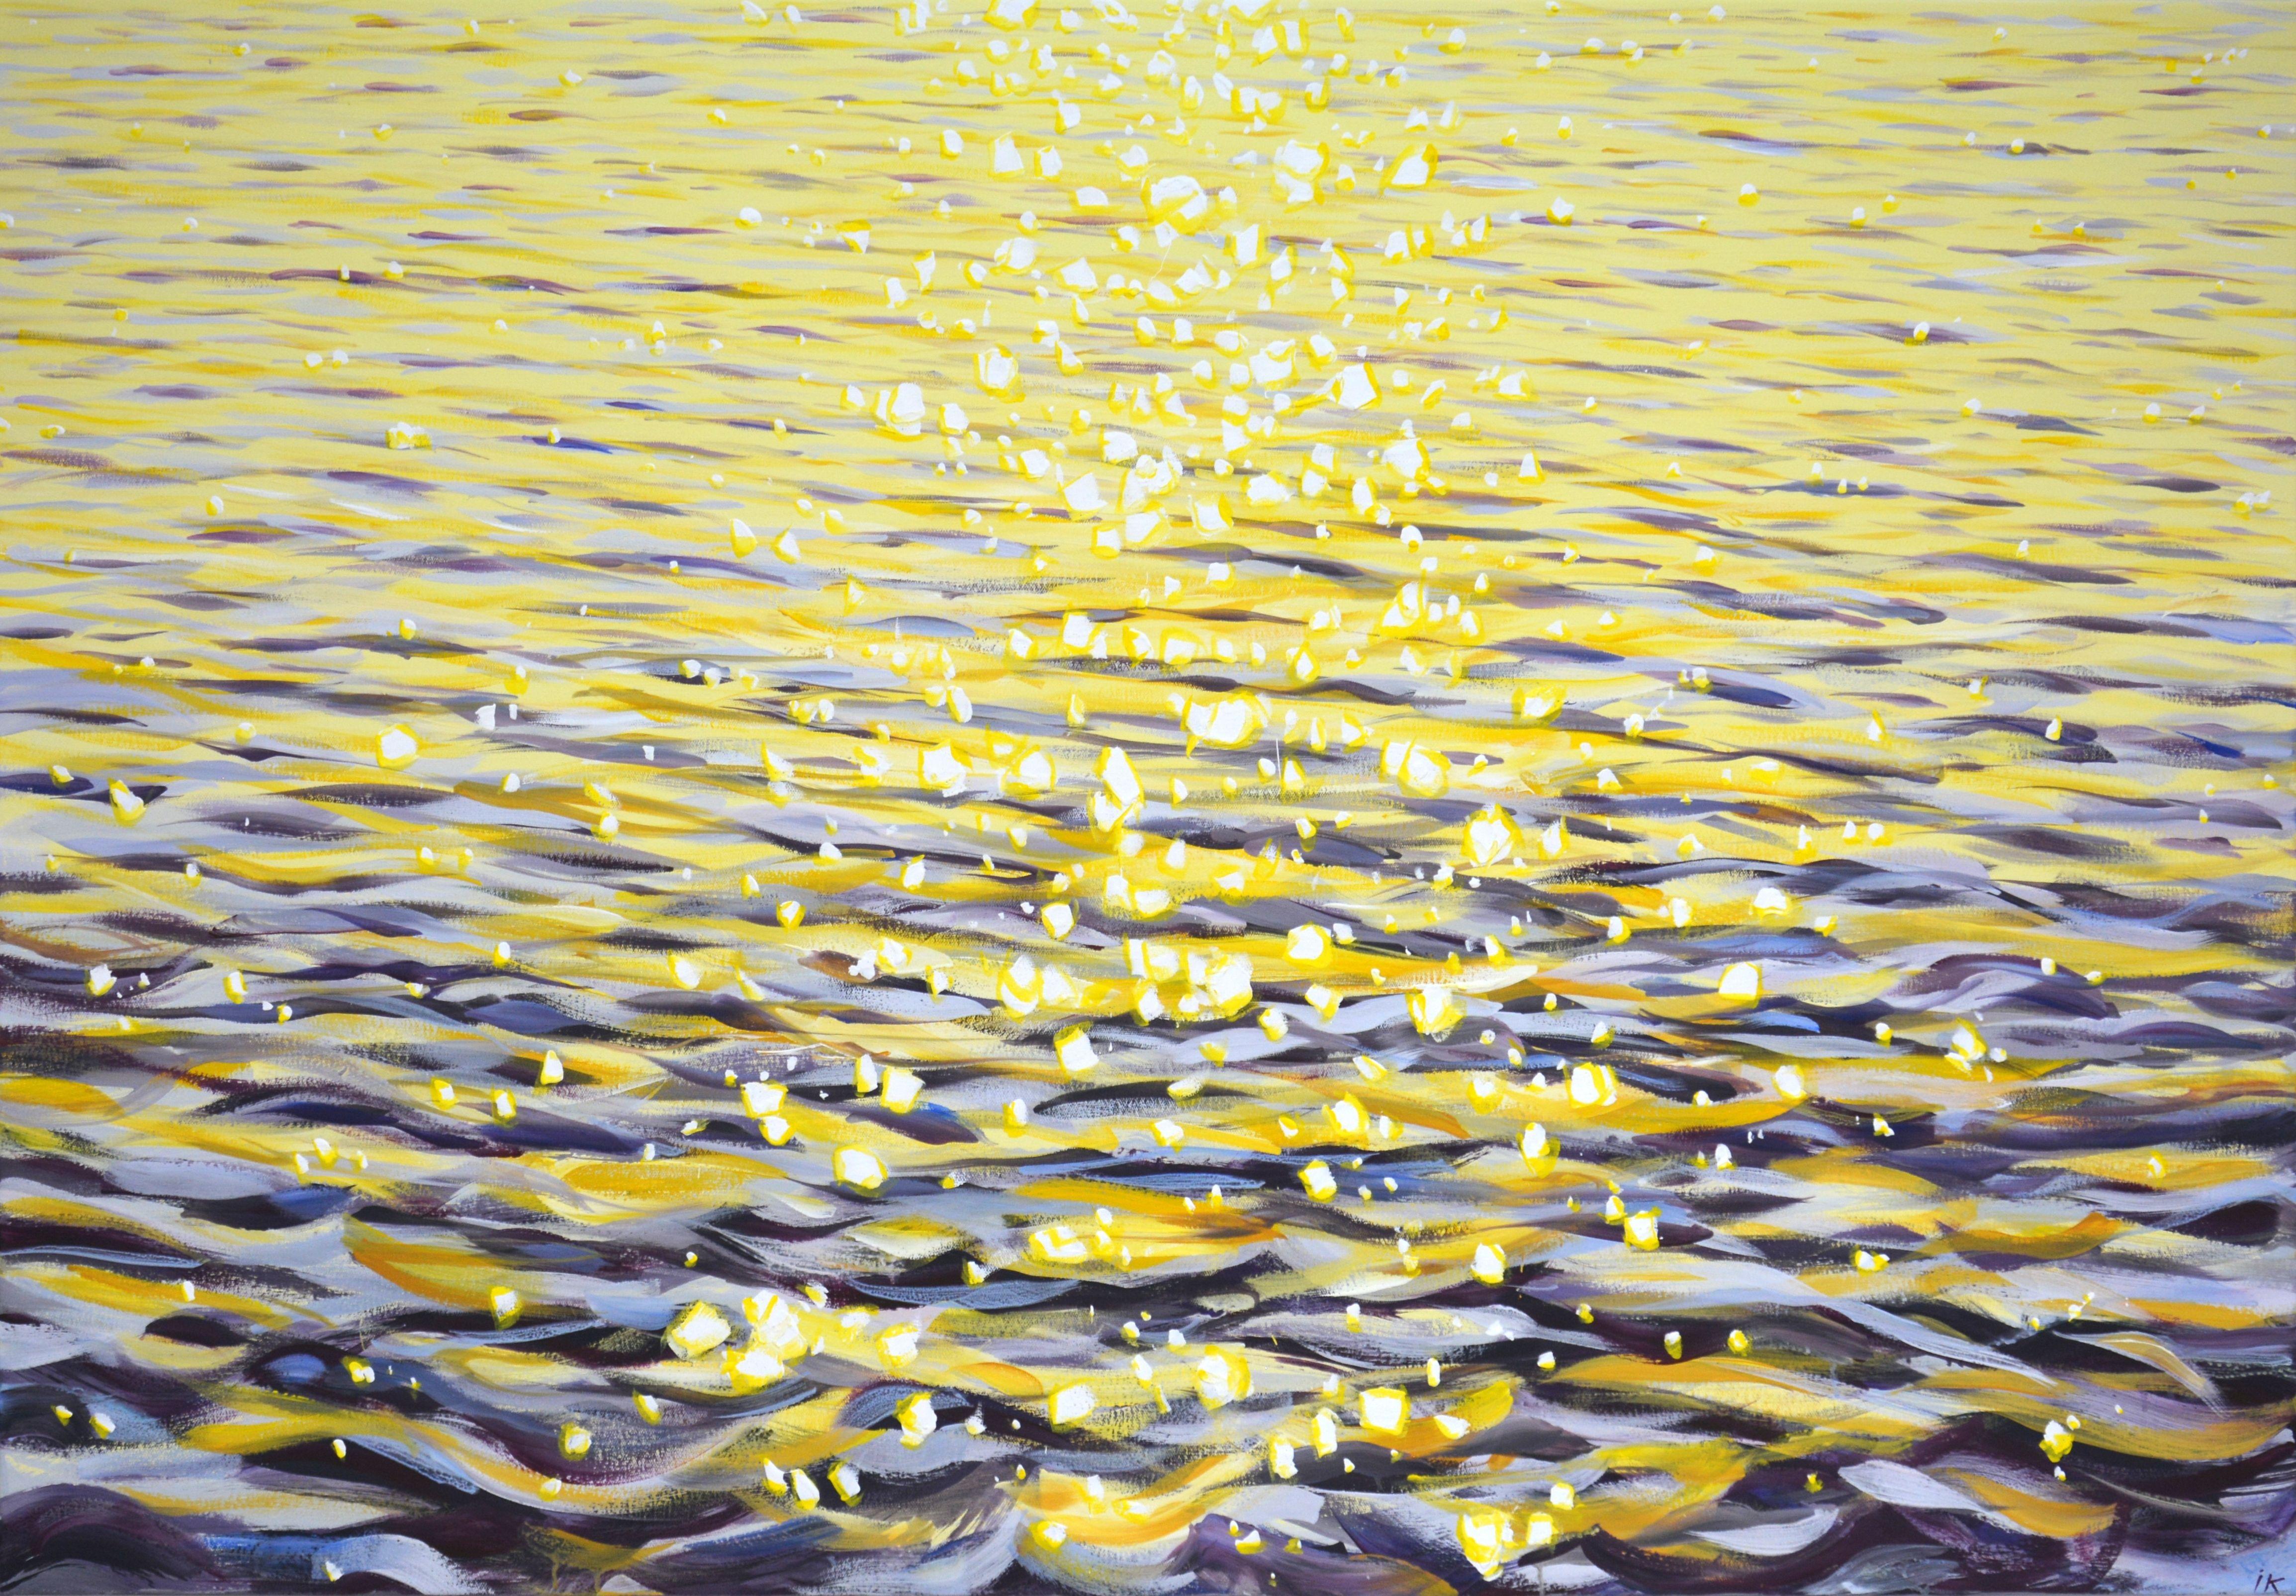 Glare on the water 35. Glare on the water, sea, small waves, serene view, create an atmosphere of relaxation, romance. Nature is the best source of inspiration. Made in the style of realism, warm-cold palette harmoniously blends with modern